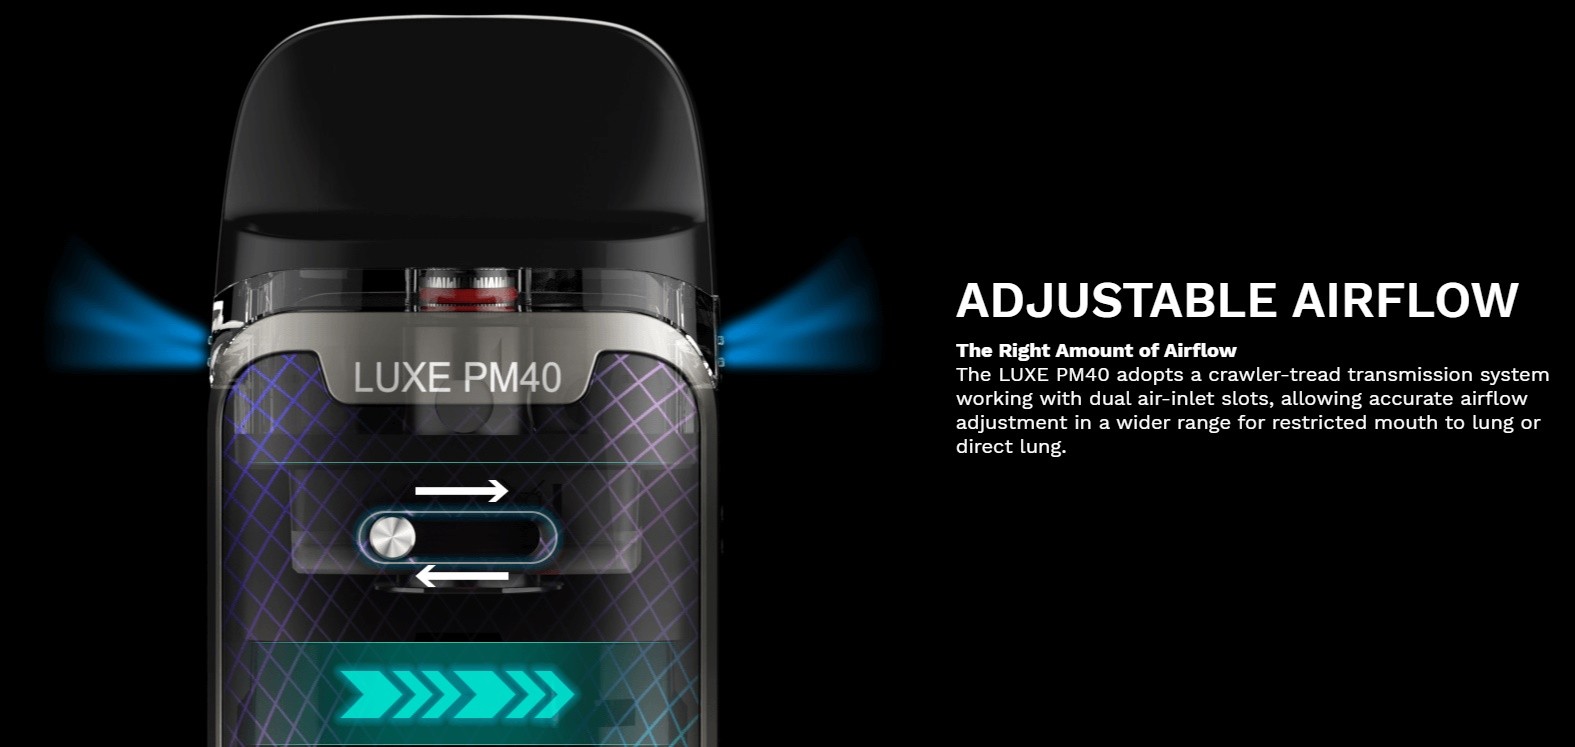 LUXE PM40 Adjustable Airflow functions